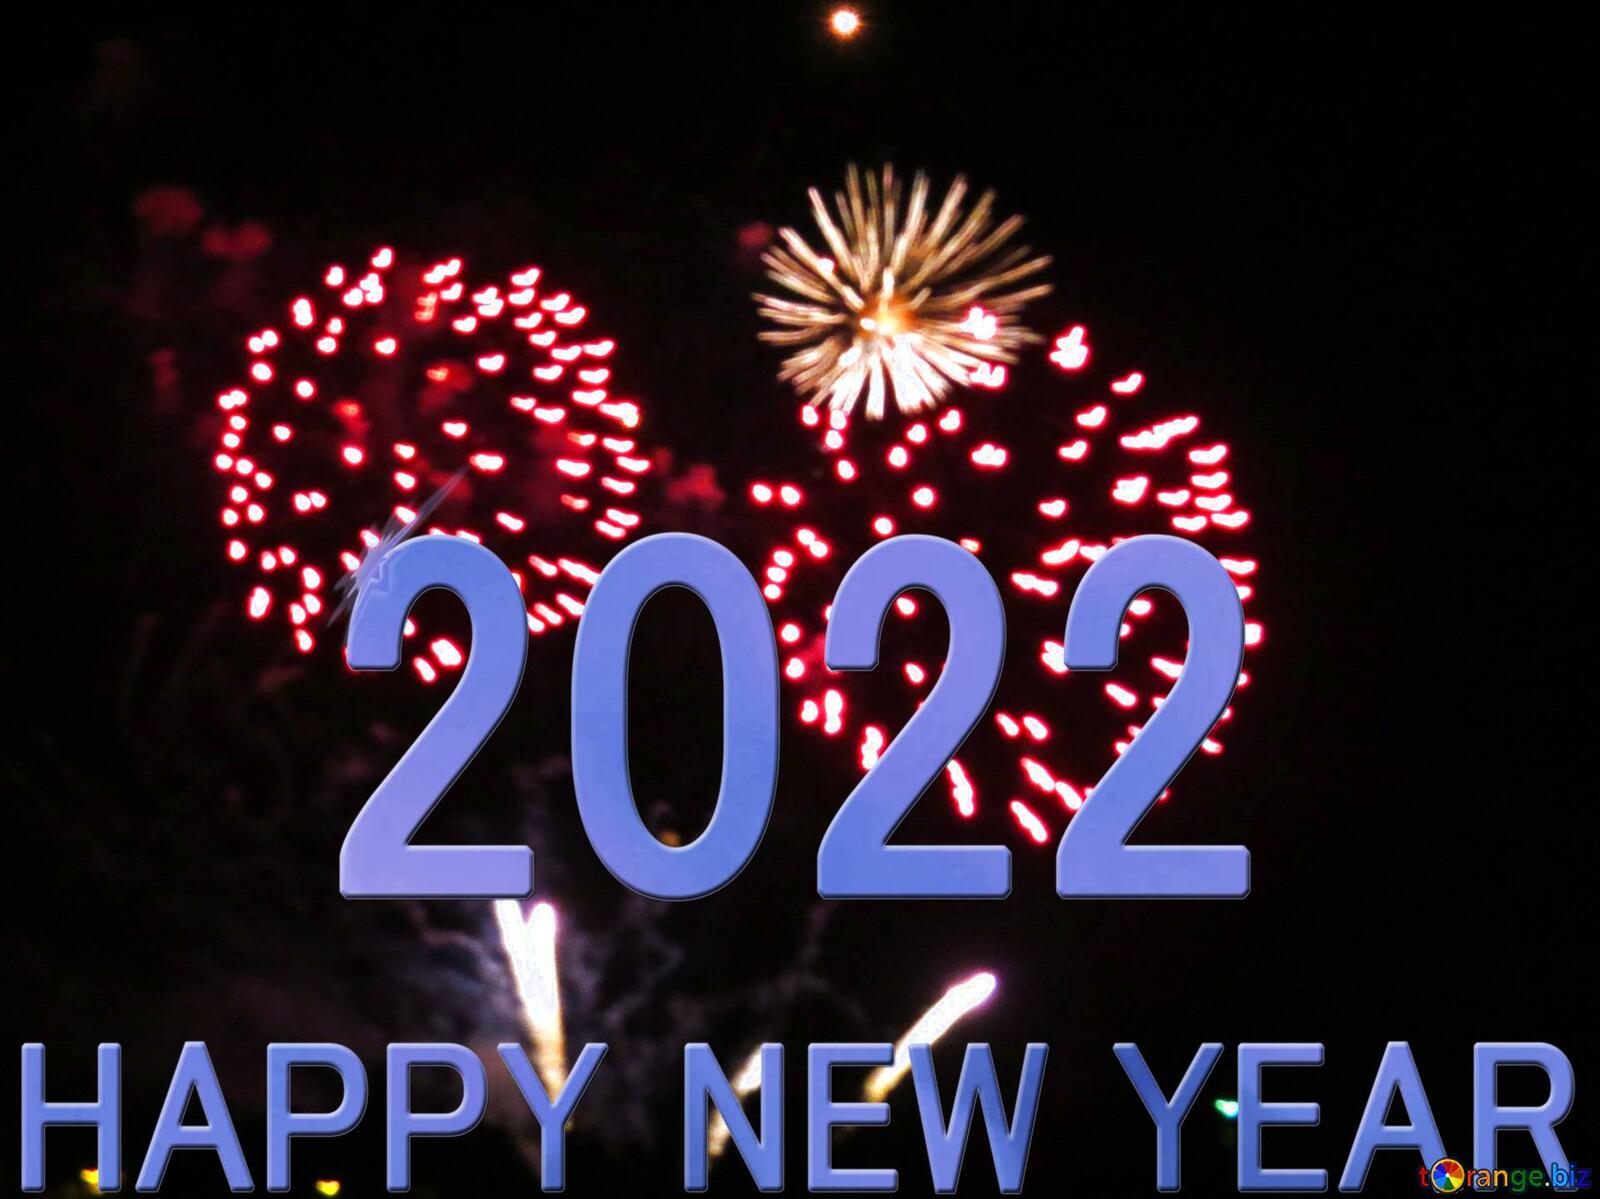 Wallpapers holiday happy new year 2022 new year 2022 on the desktop